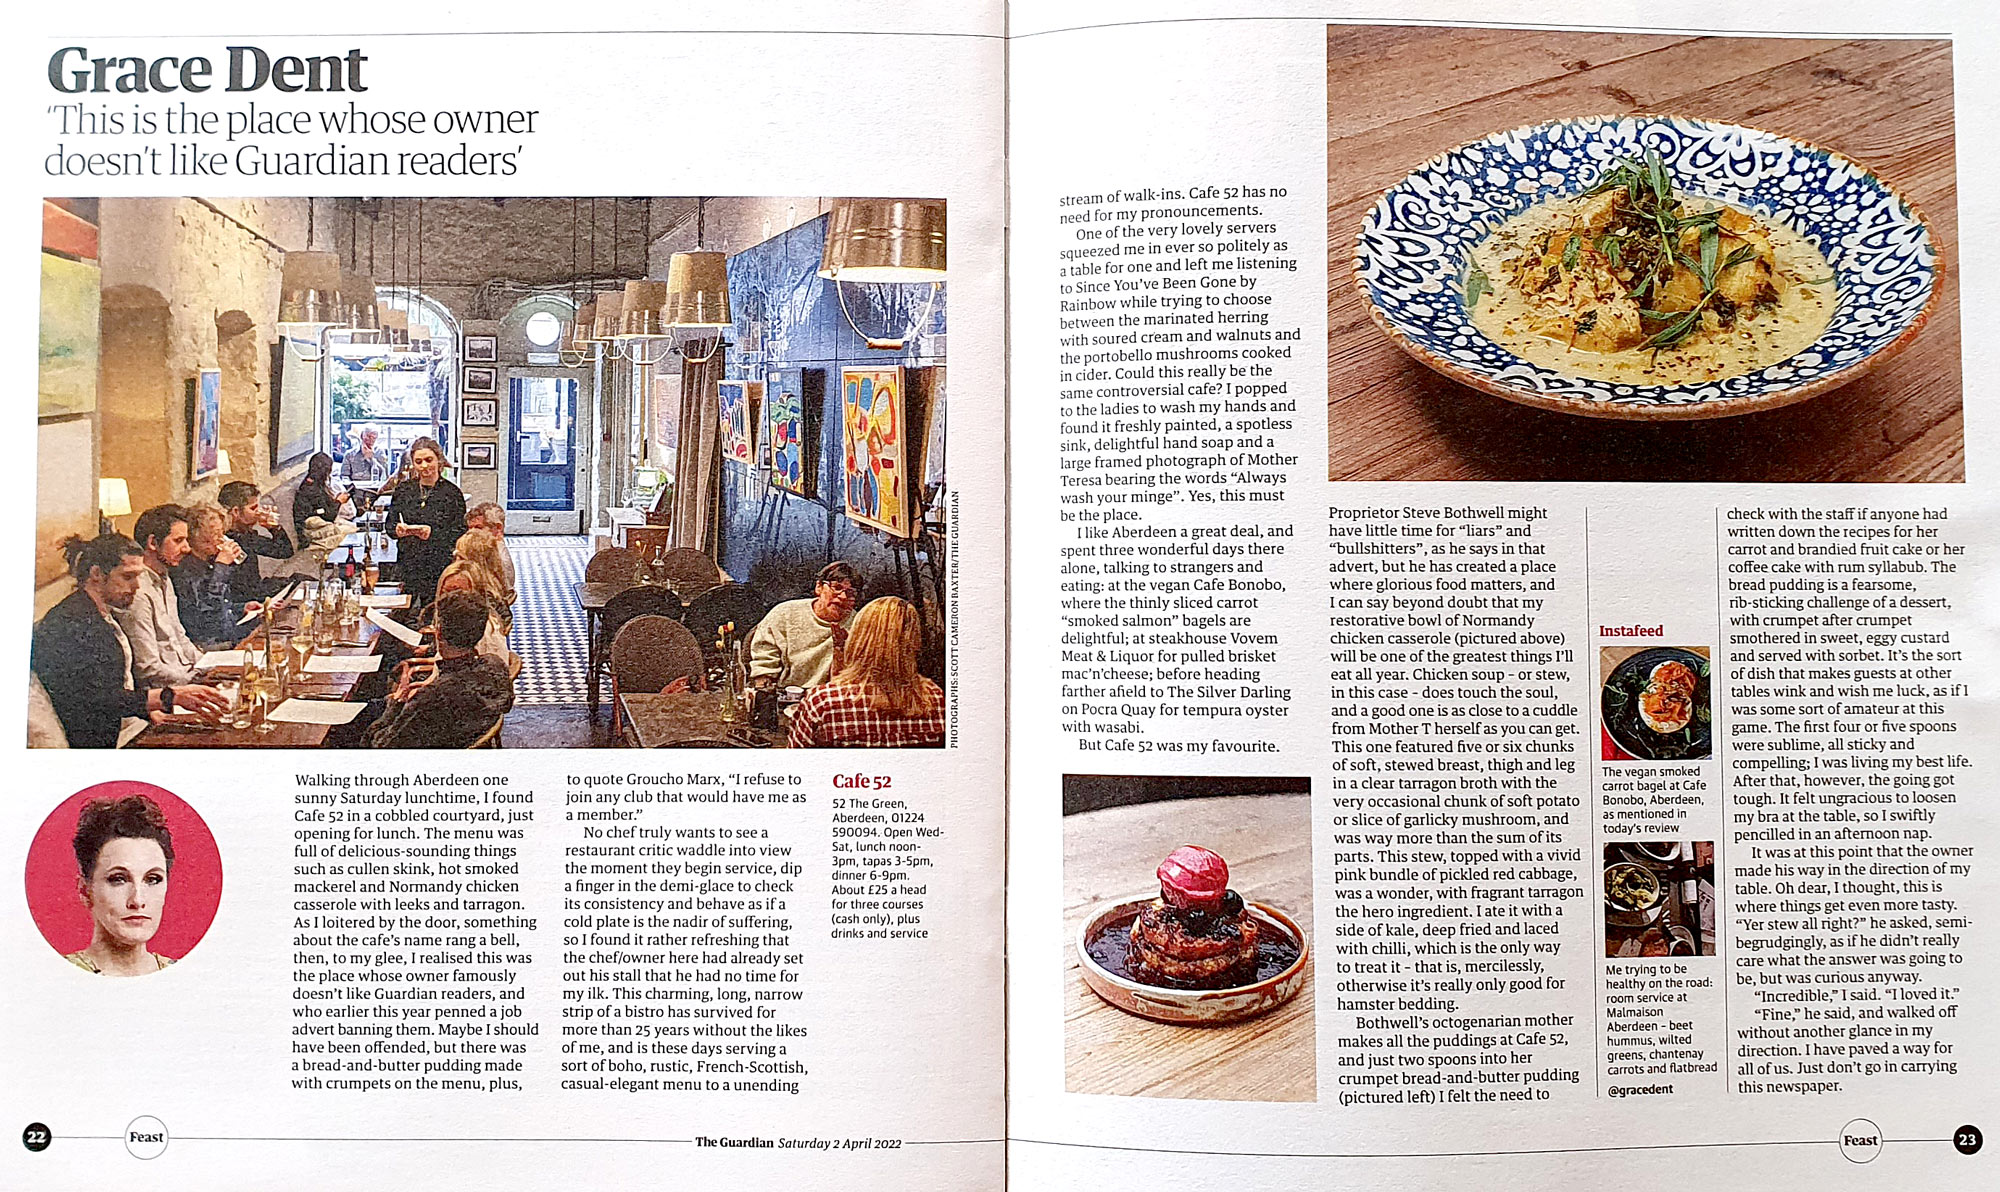 Press screenshot of The Guardian, Feast Magazine, Food Review of Cafe 52 Aberdeen by Grace Dent, showing photographs by Scott Cameron Baxter.